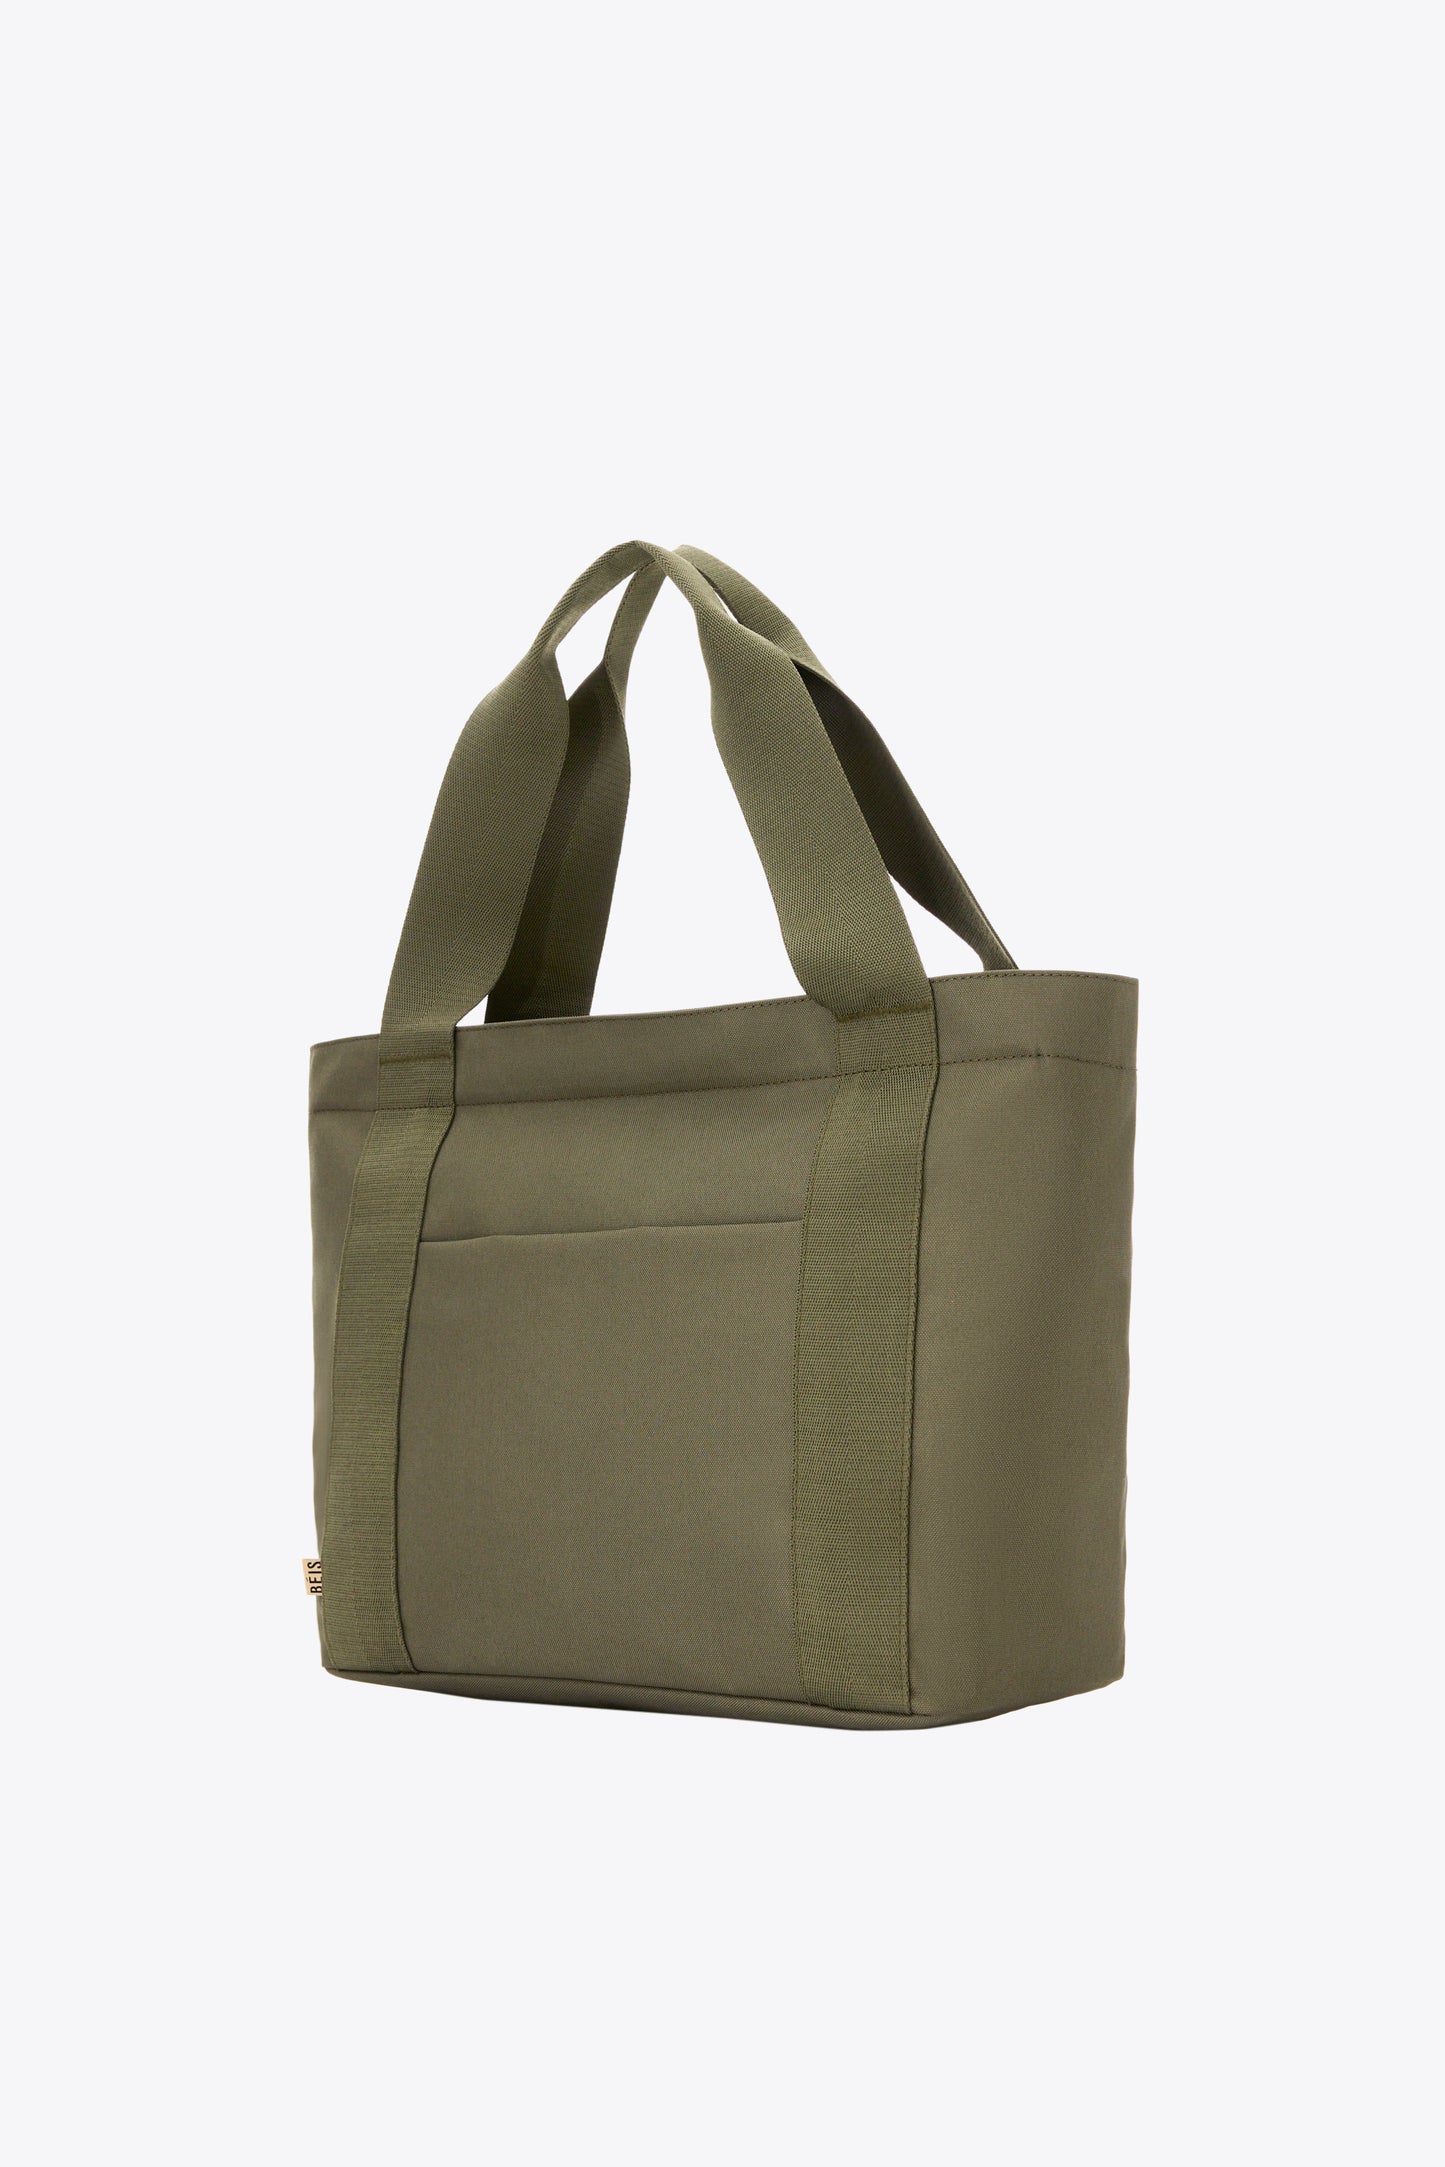 The BÉISics Tote in Olive